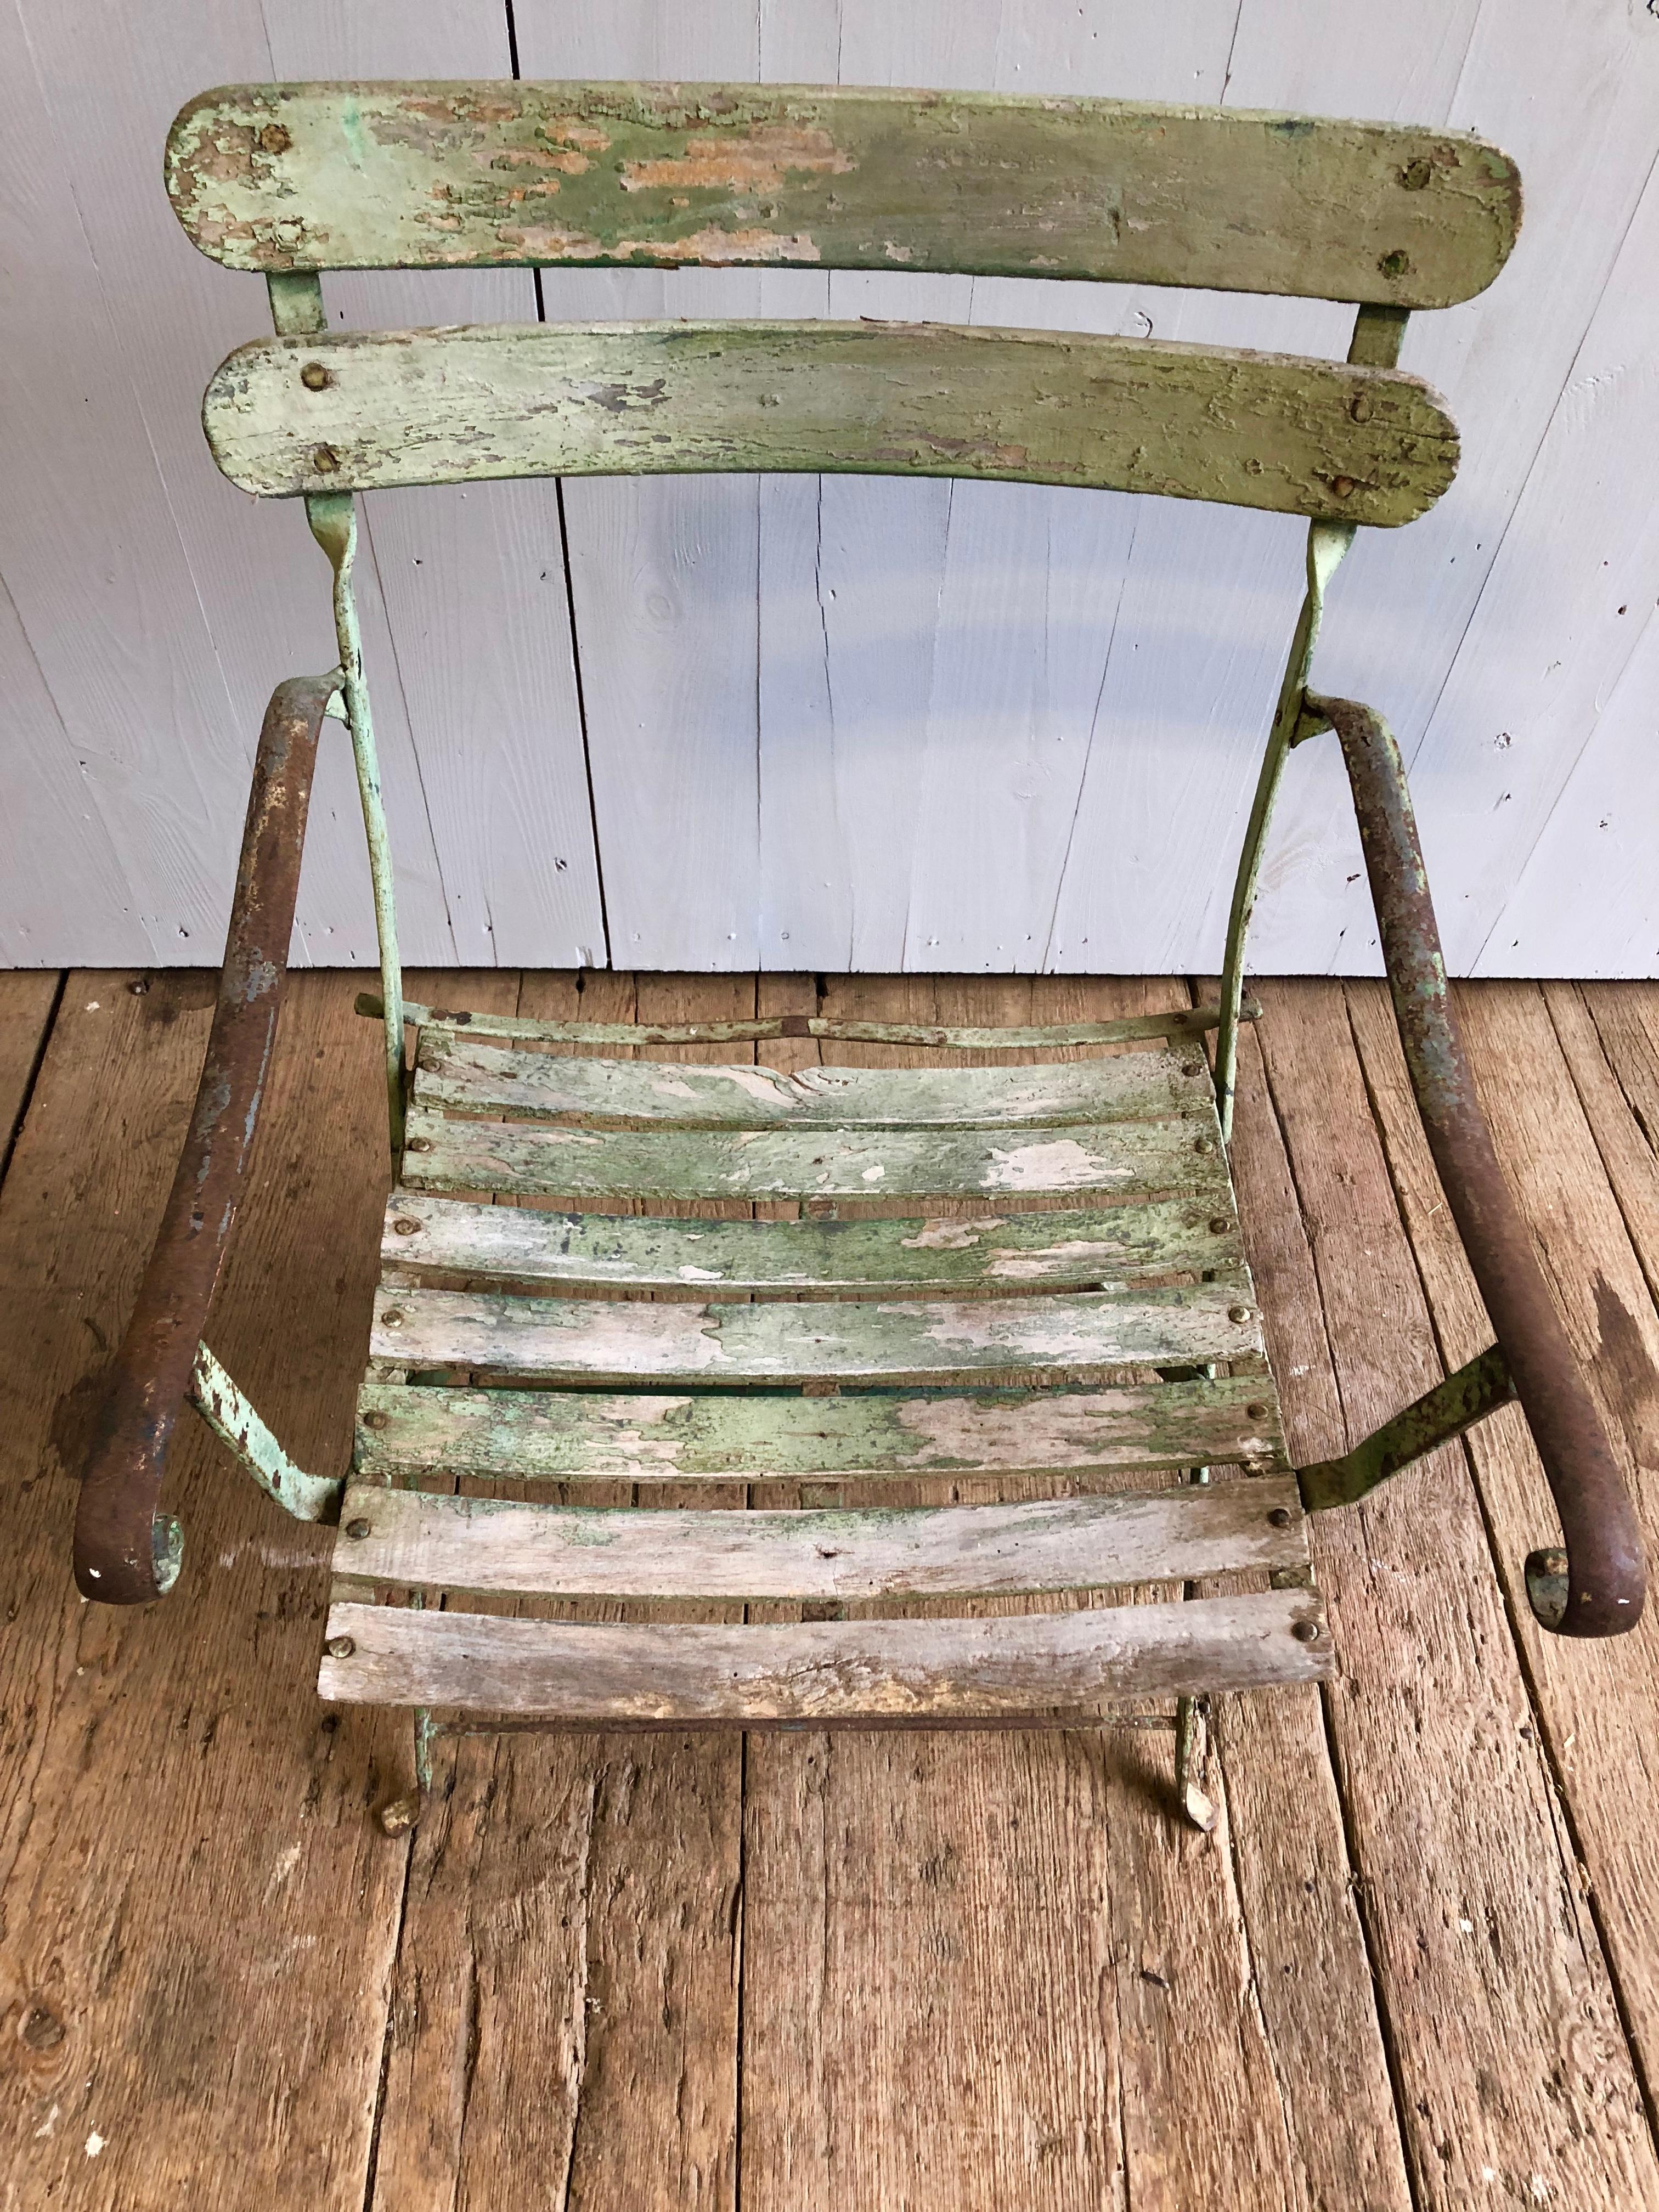 A well-worn French garden armchair in wrought iron and wood with old celedon green paint, circa 1870. Nice scrolled arms and very sturdy seat and back.